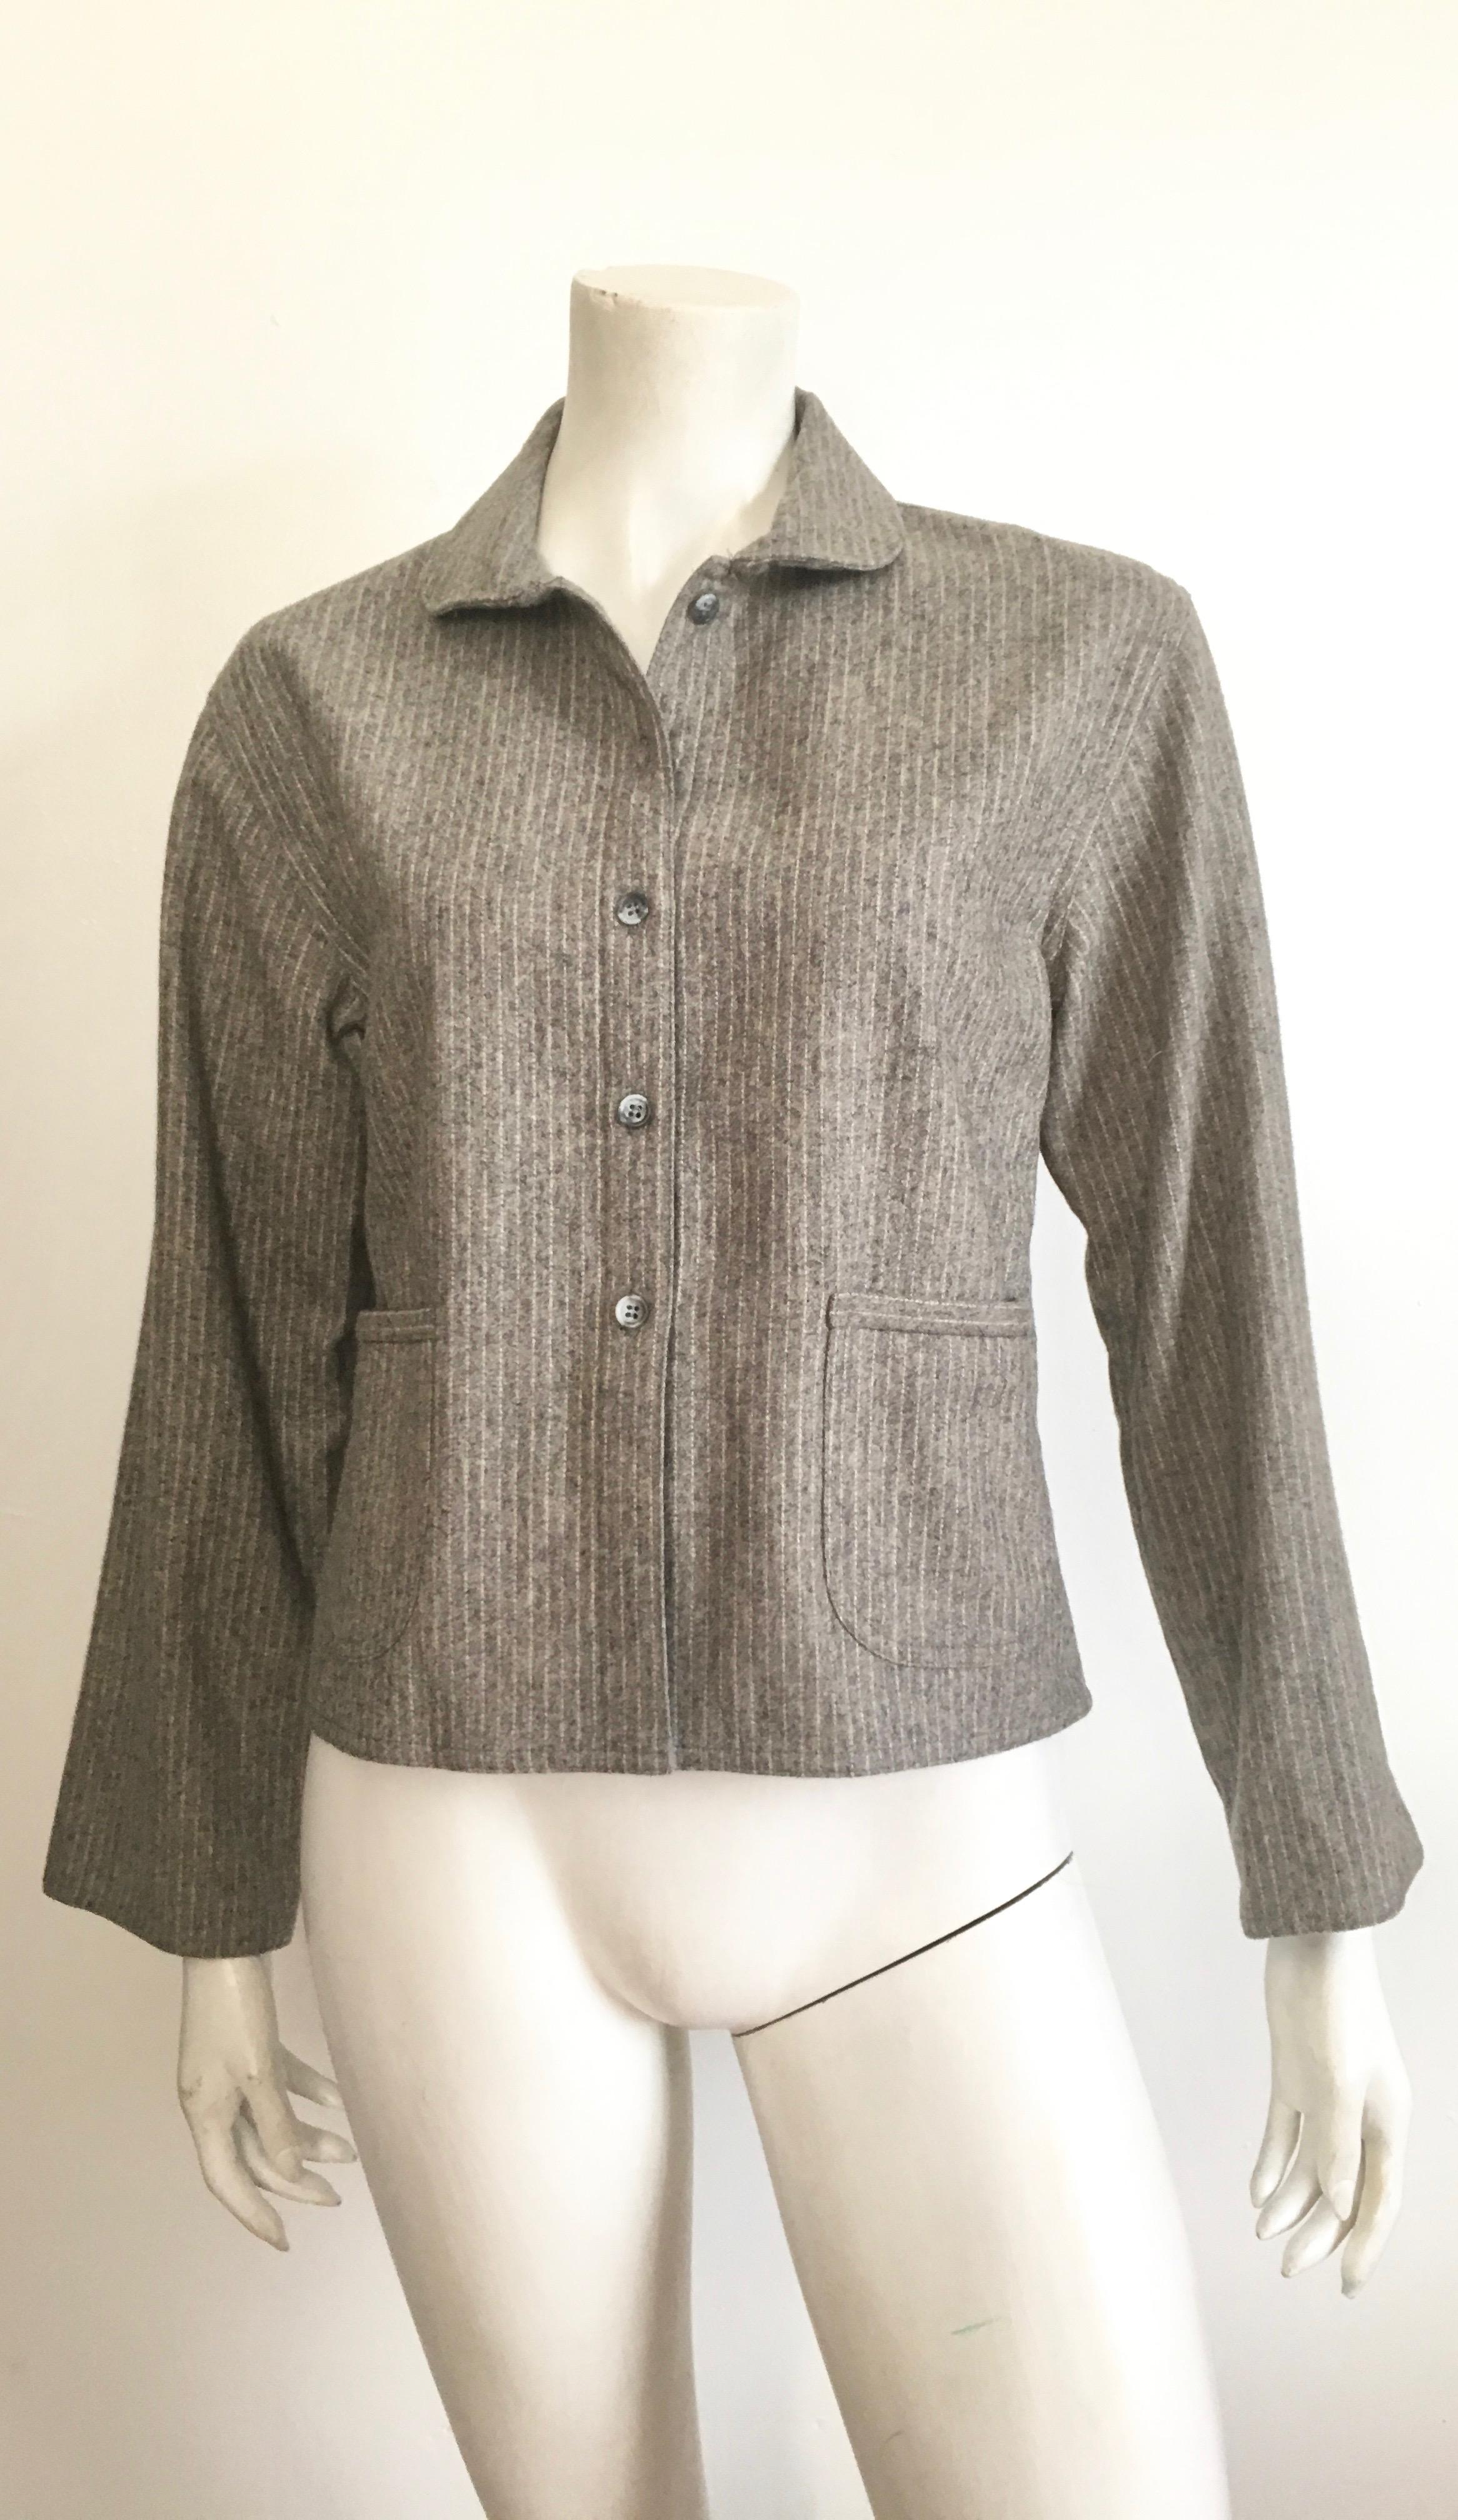 Geoffrey Beene 'BeeneBag' 1980s grey pinstripe wool jacket is labeled a size 8 but will also fit a size 6 nicely. This classic timeless jacket is not lined and has two front pockets in front.  Wear this light weight jacket with your 1980s Calvin